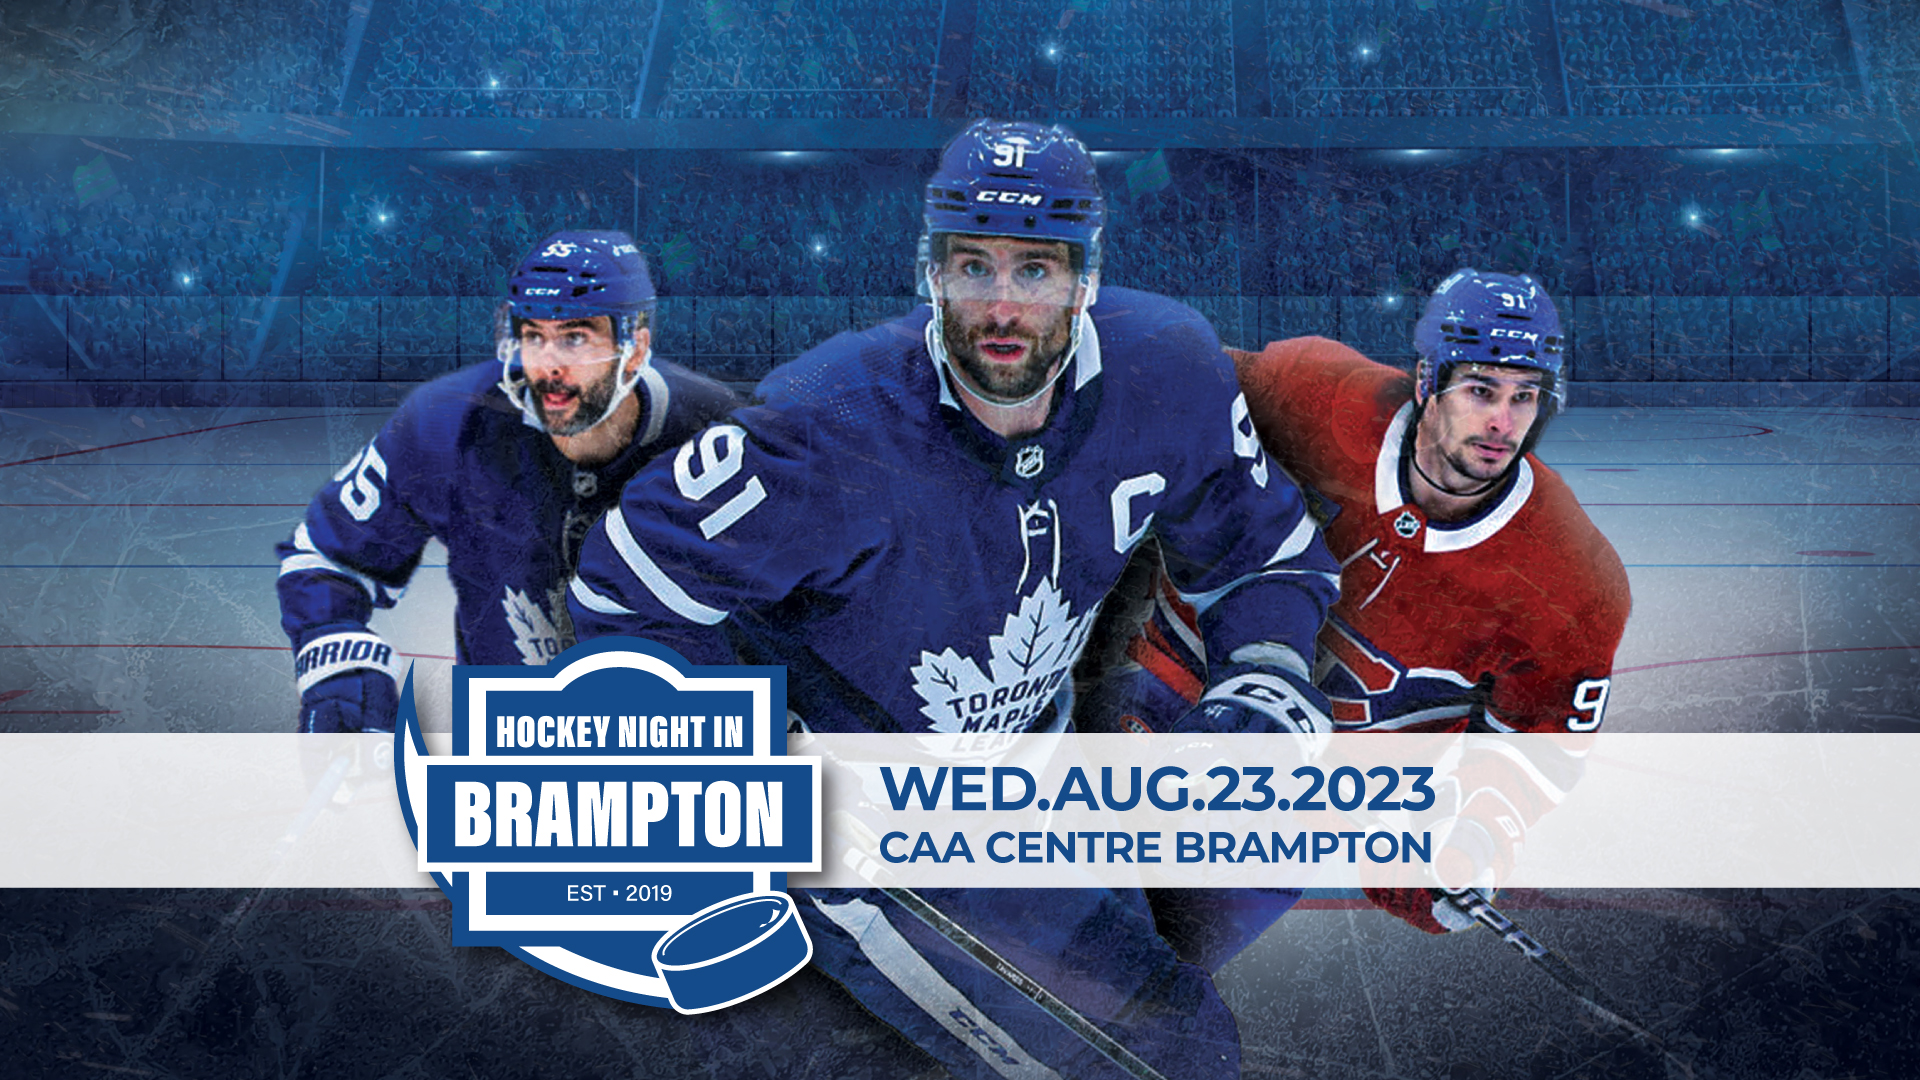 Maple Leafs' Tavares, Giordano among NHLers playing in Hockey Night in  Brampton for charity